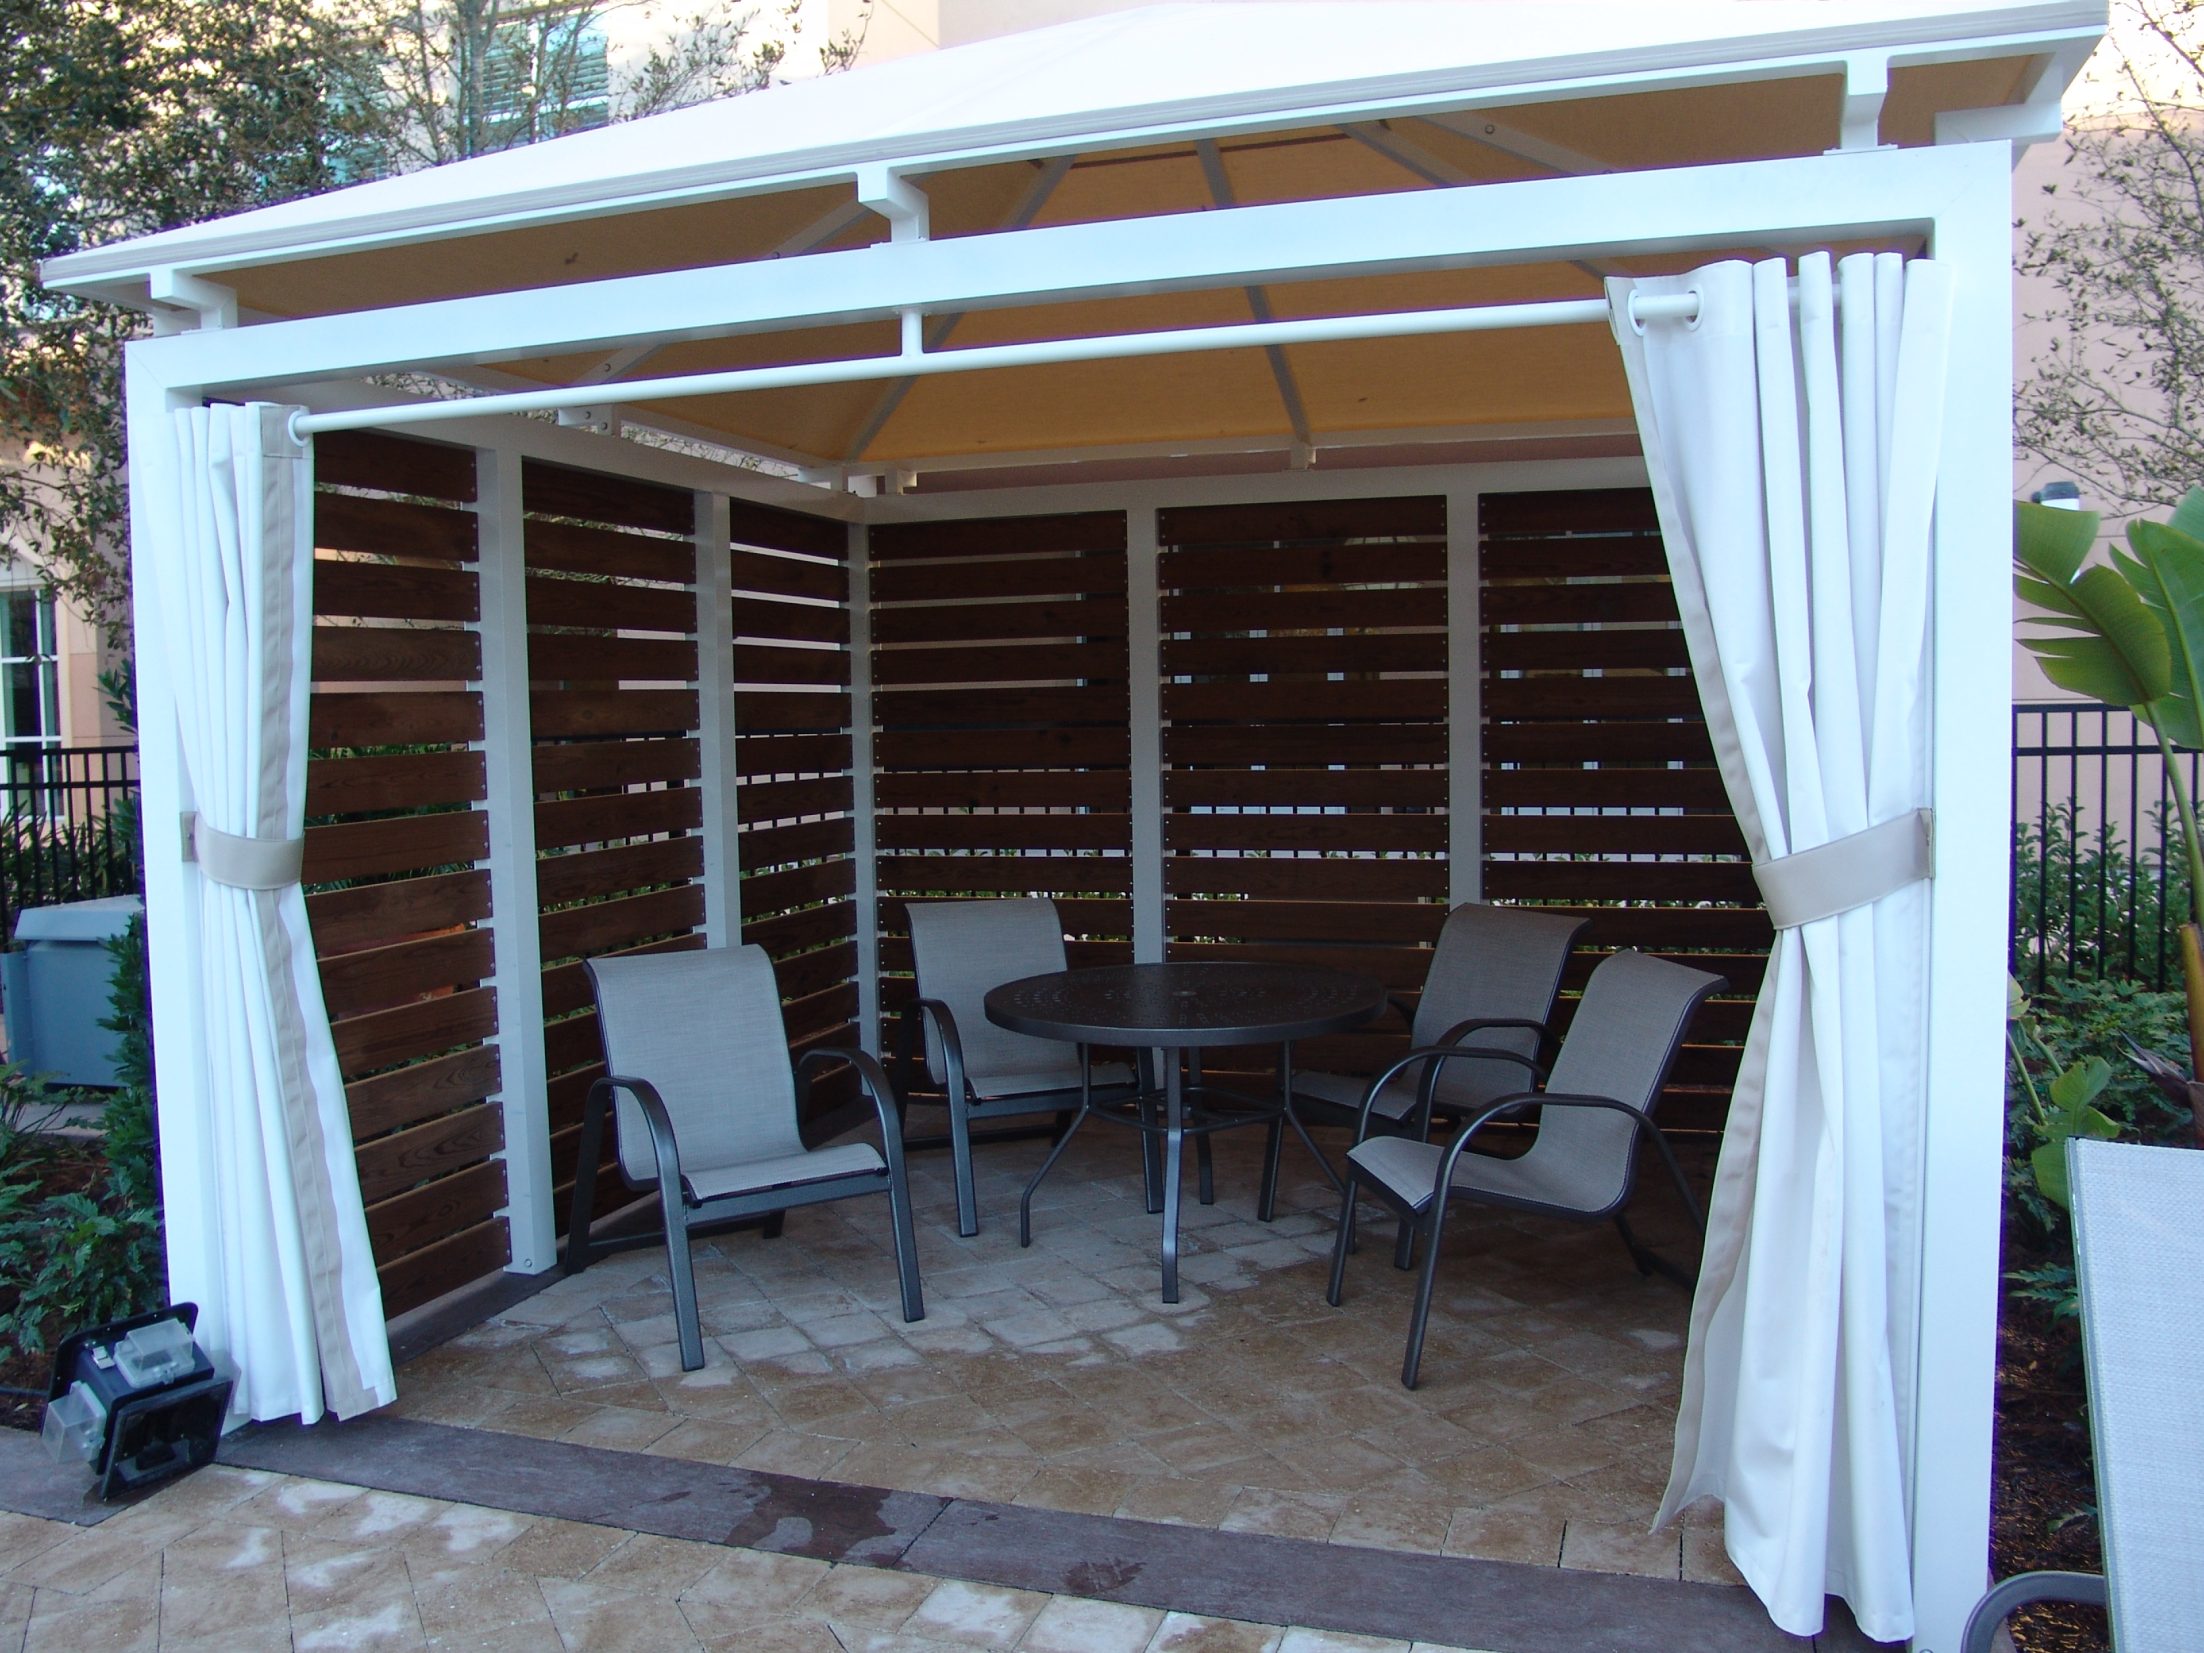 CommerciaaCommercial Cabana with Seating — Fort Myers, FL — Accent Awning Companyl Cabanas